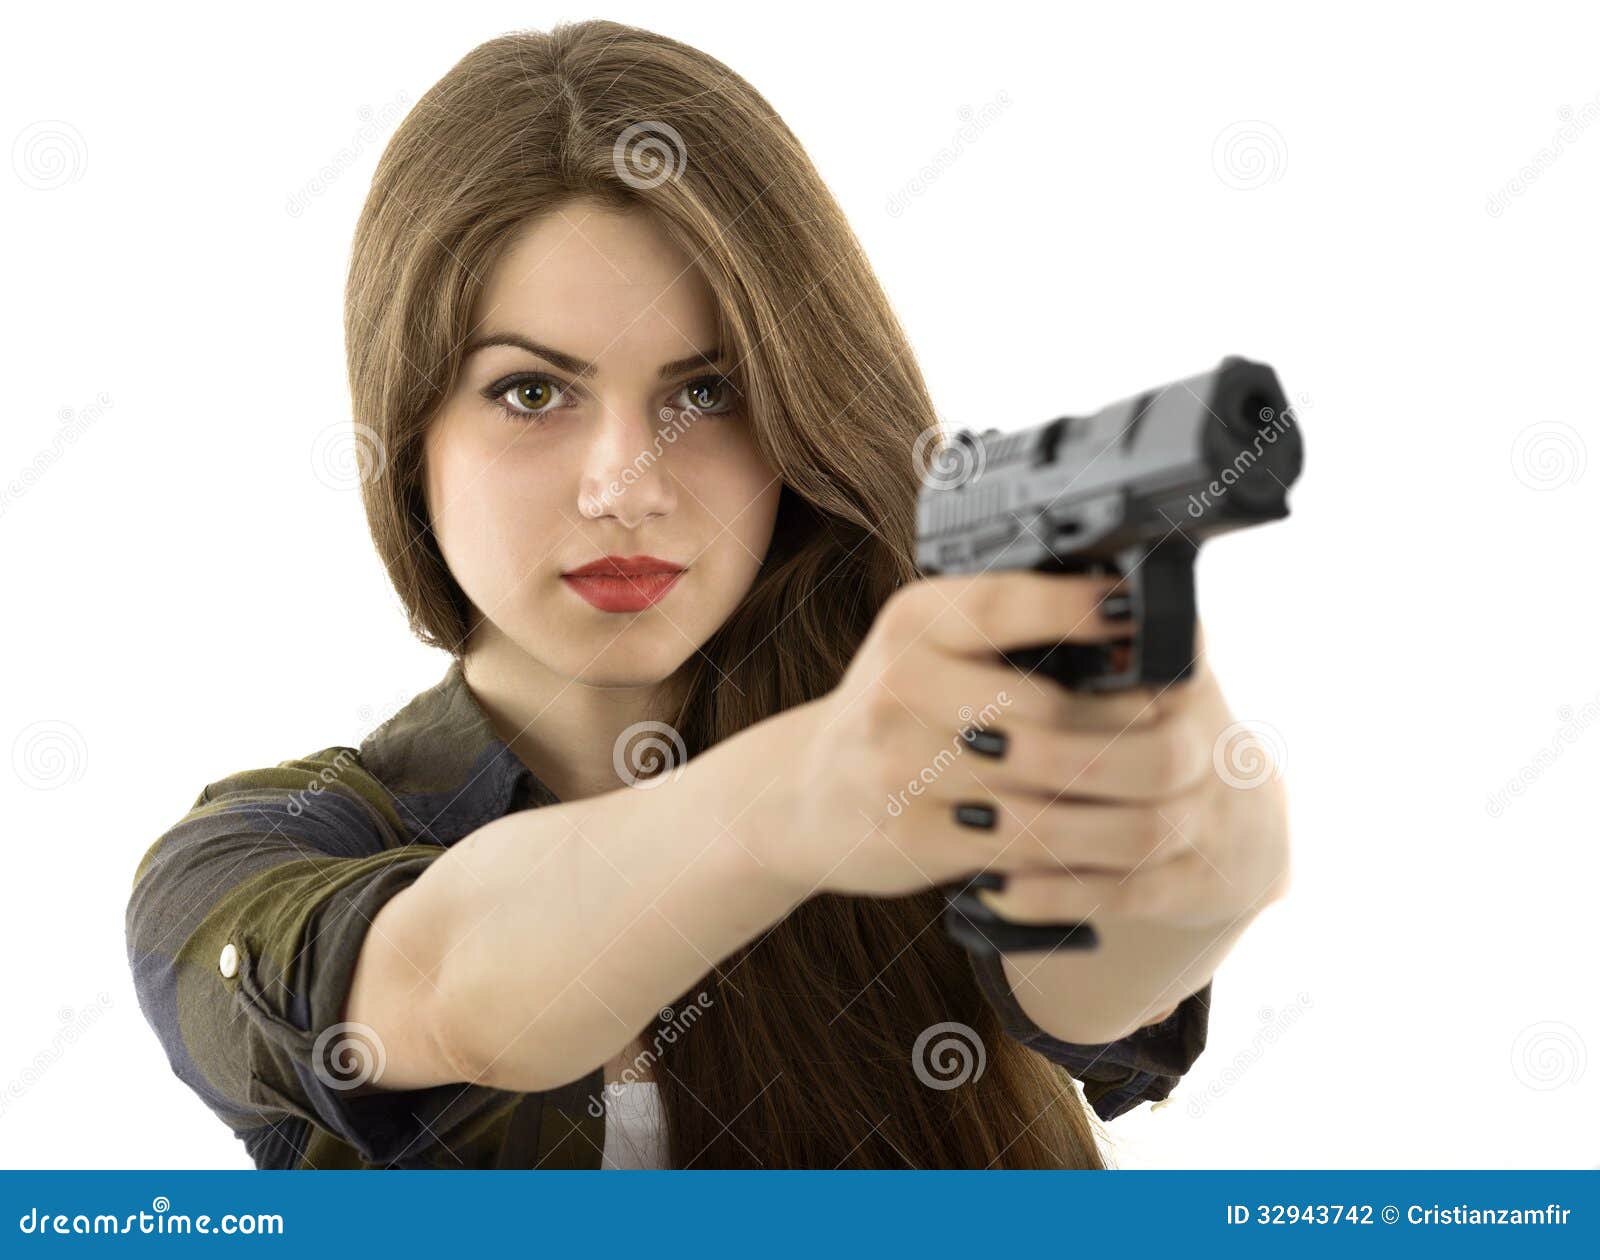 christian dazo add pictures of women with guns photo